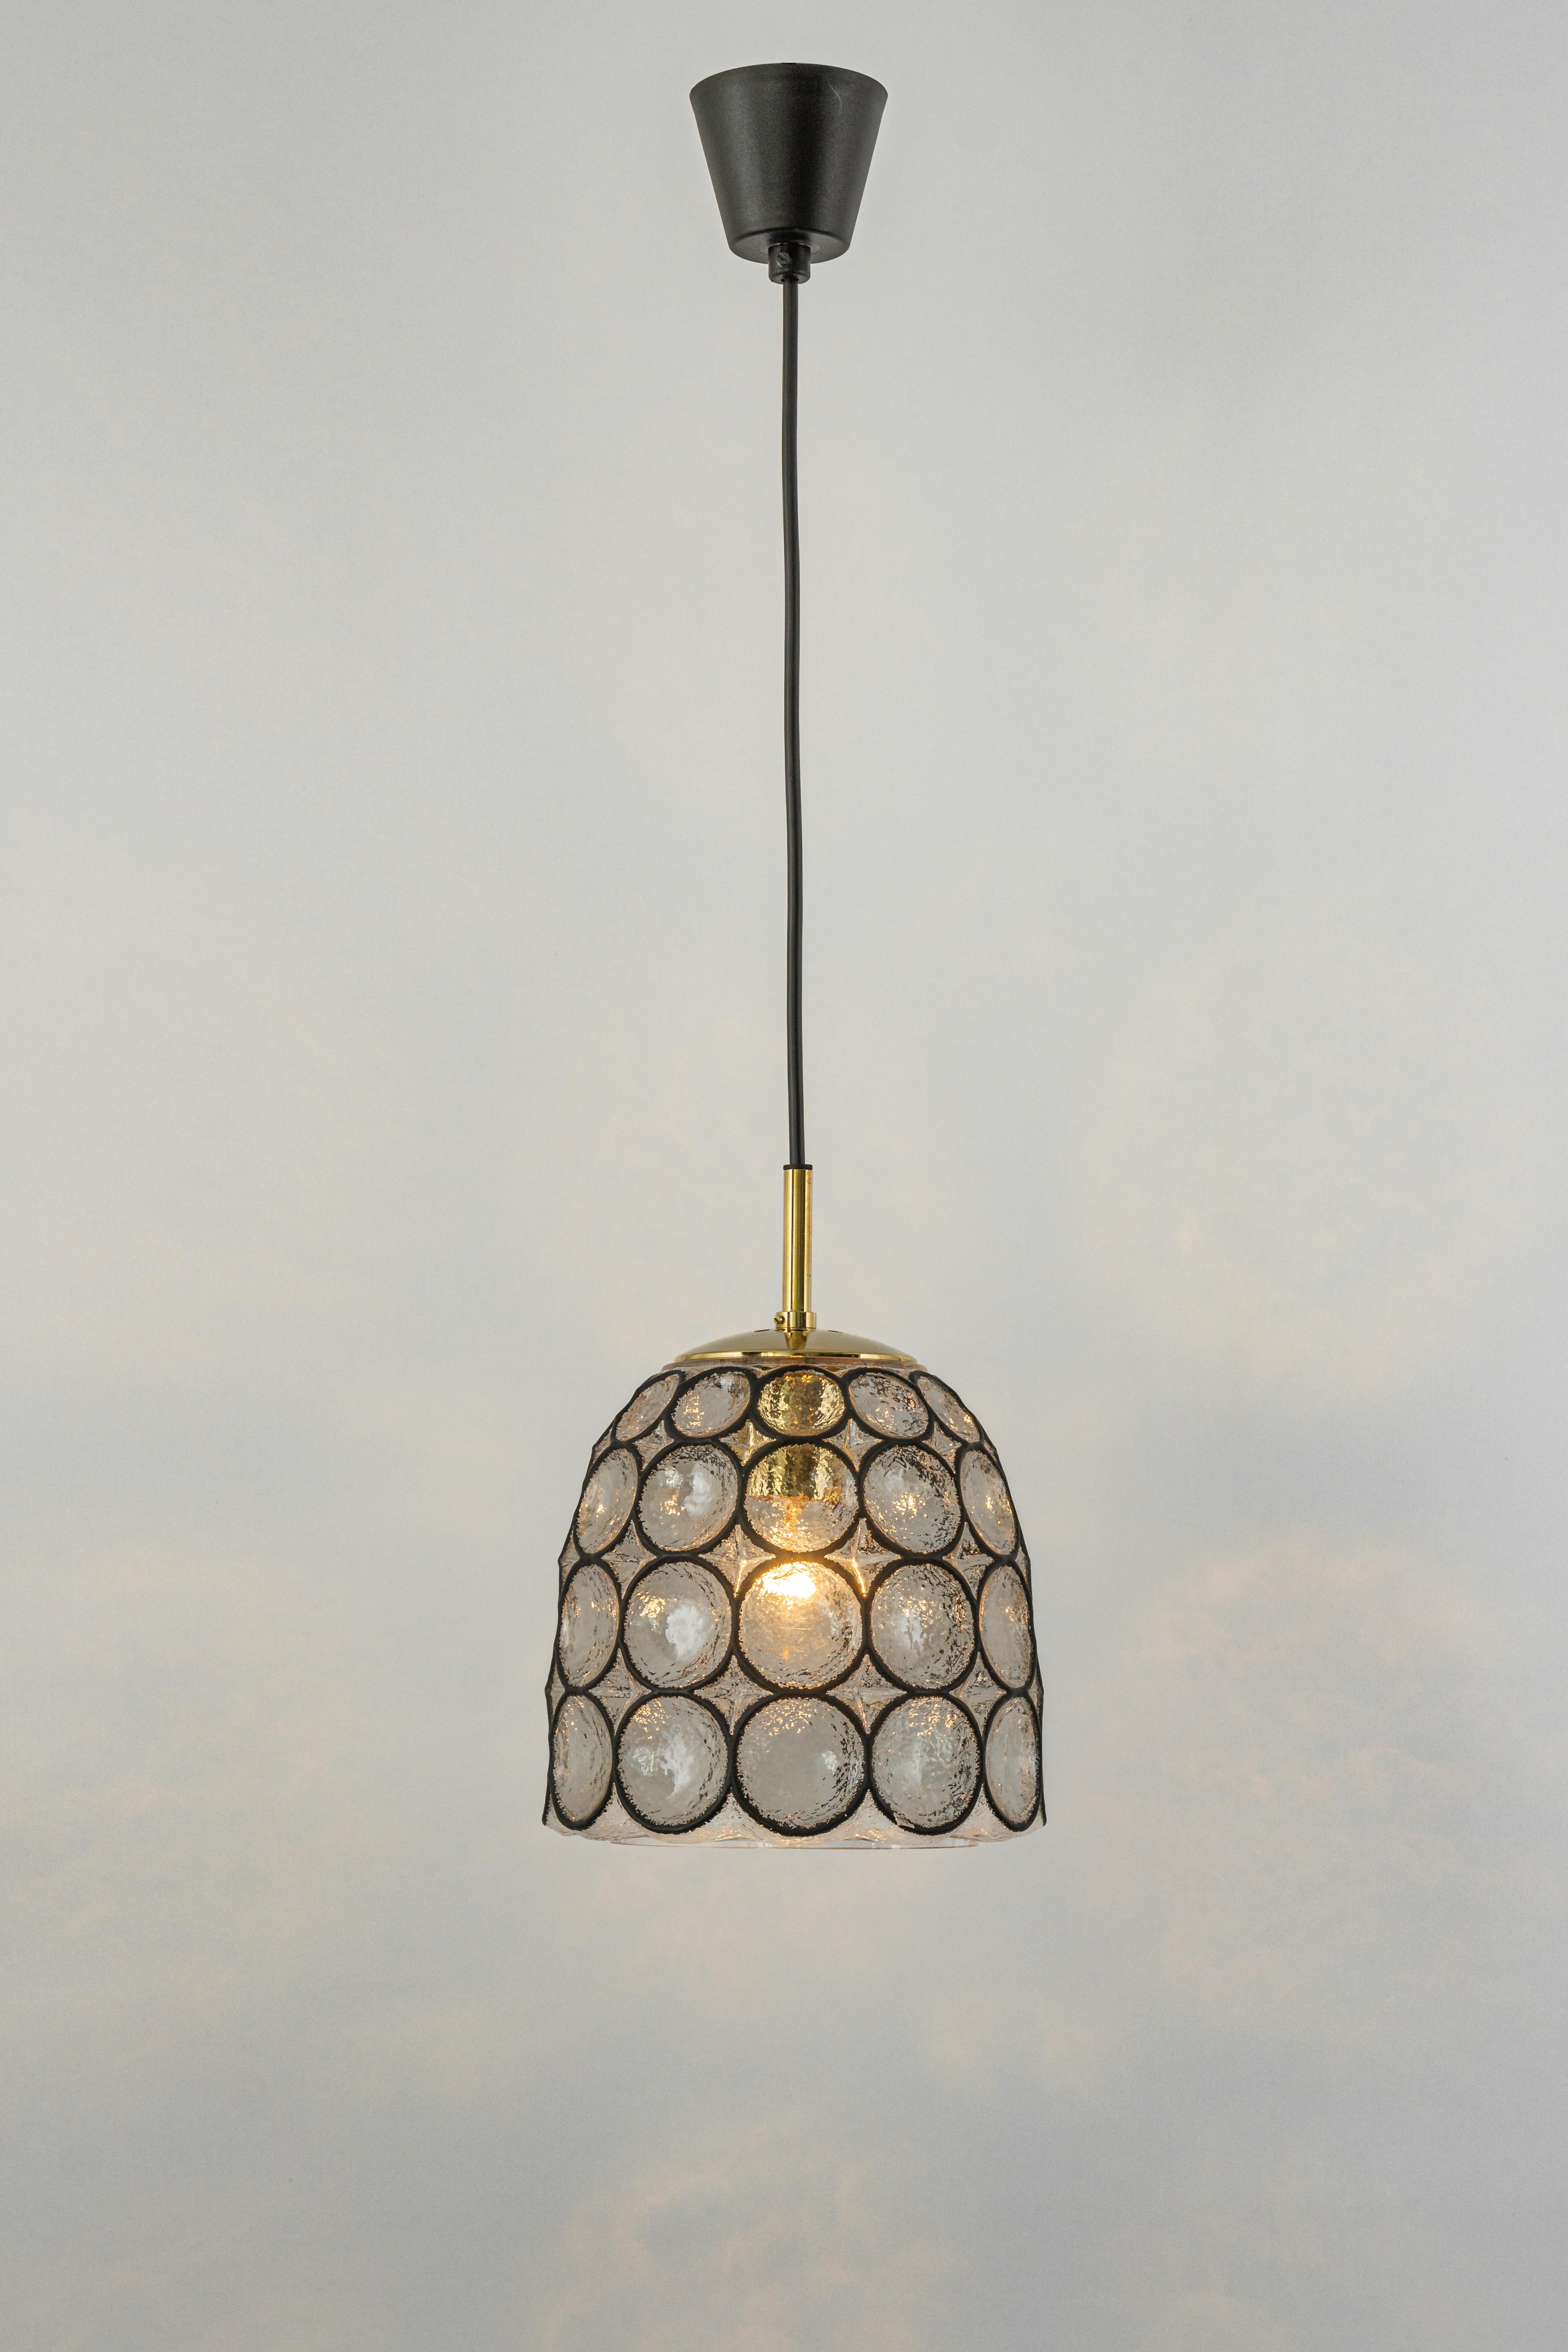 1 of 4 Petite Minimalist iron and clear glass pendant light manufactured by Limburg Glashutte, Germany, circa 1960-1969. 

Heavy quality and in very good condition. Cleaned, well-wired, and ready to use. Each fixture requires 1 x E27 Standard